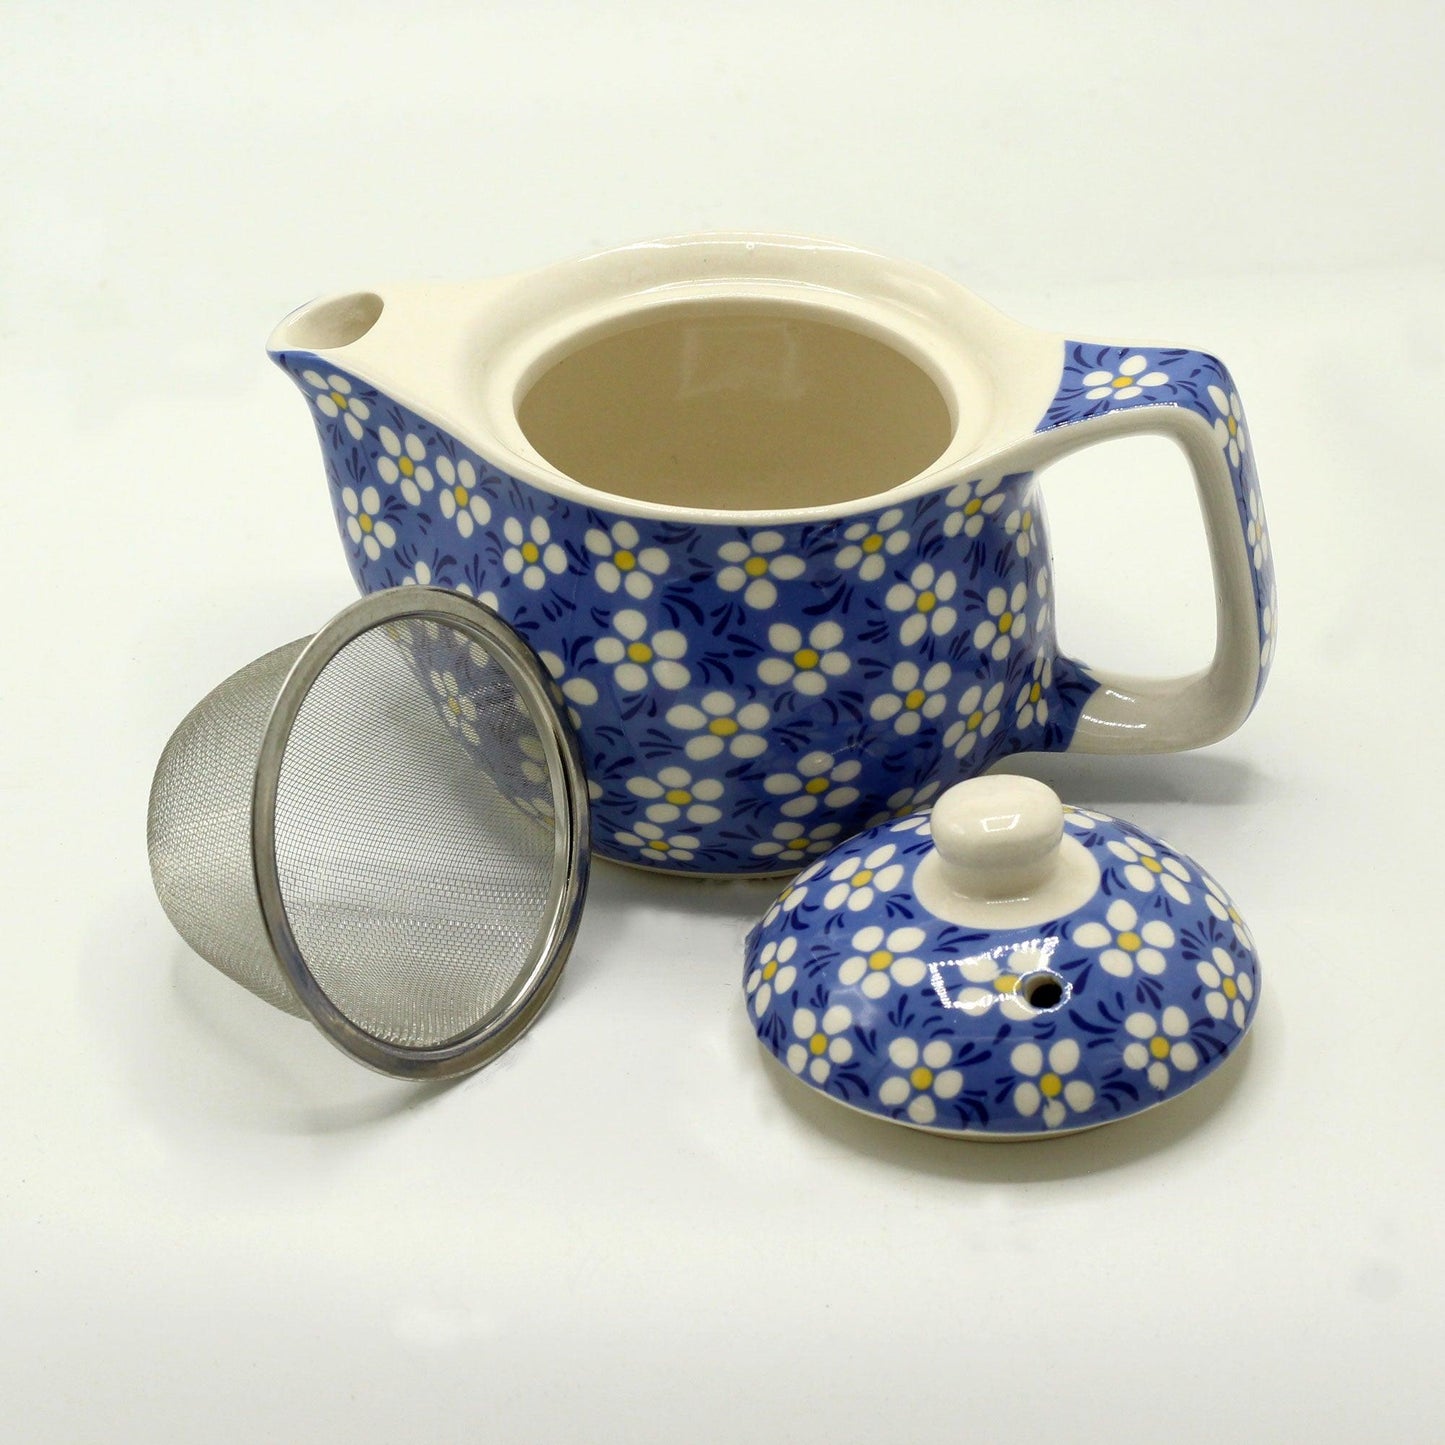 Small Herbal Teapot - Blue Daisey - DuvetDay.co.uk